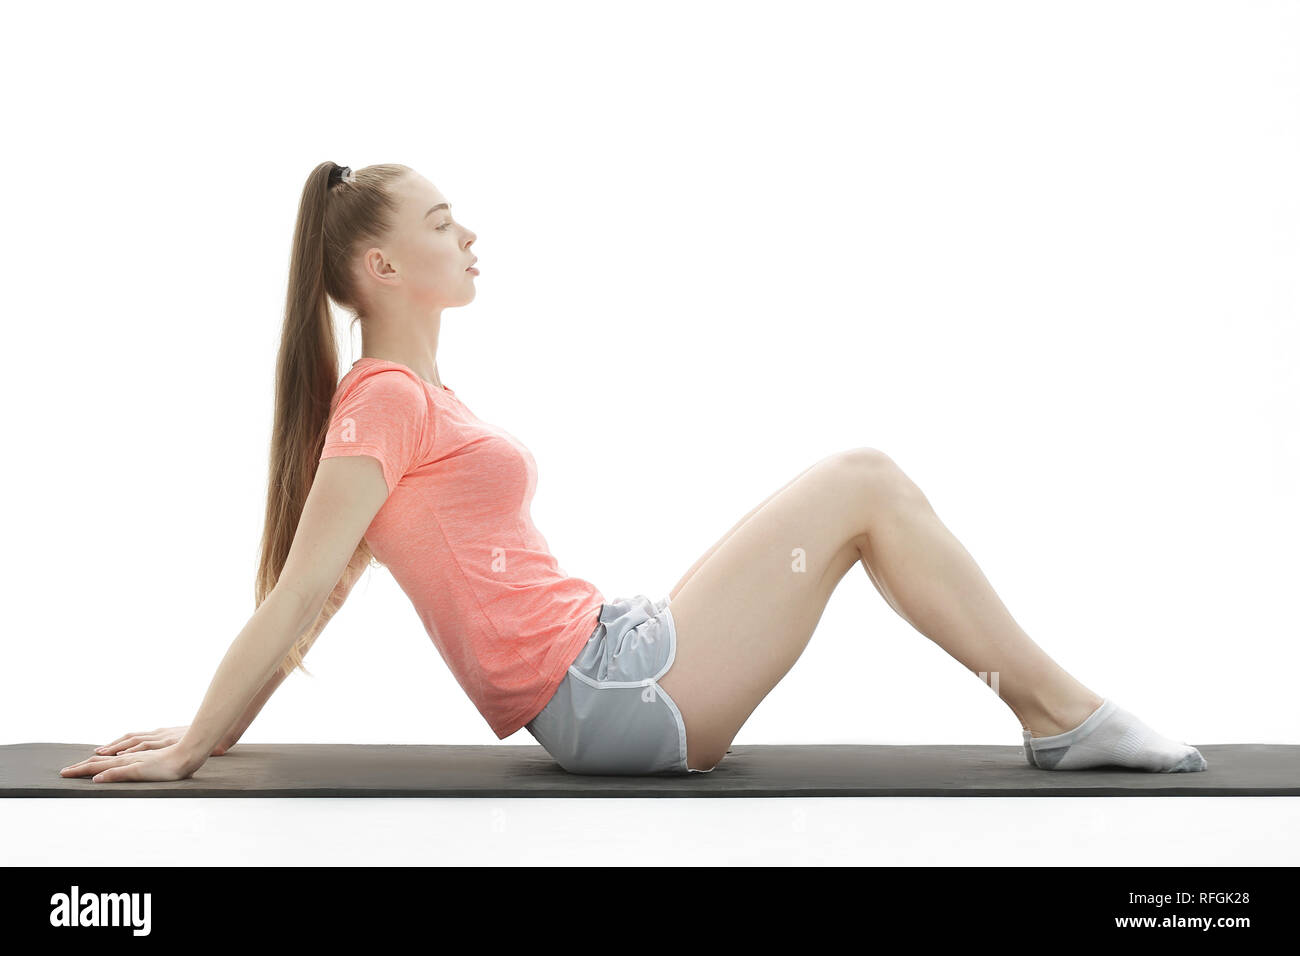 fitness woman doing exercise to strengthen the abdominal muscles Stock Photo